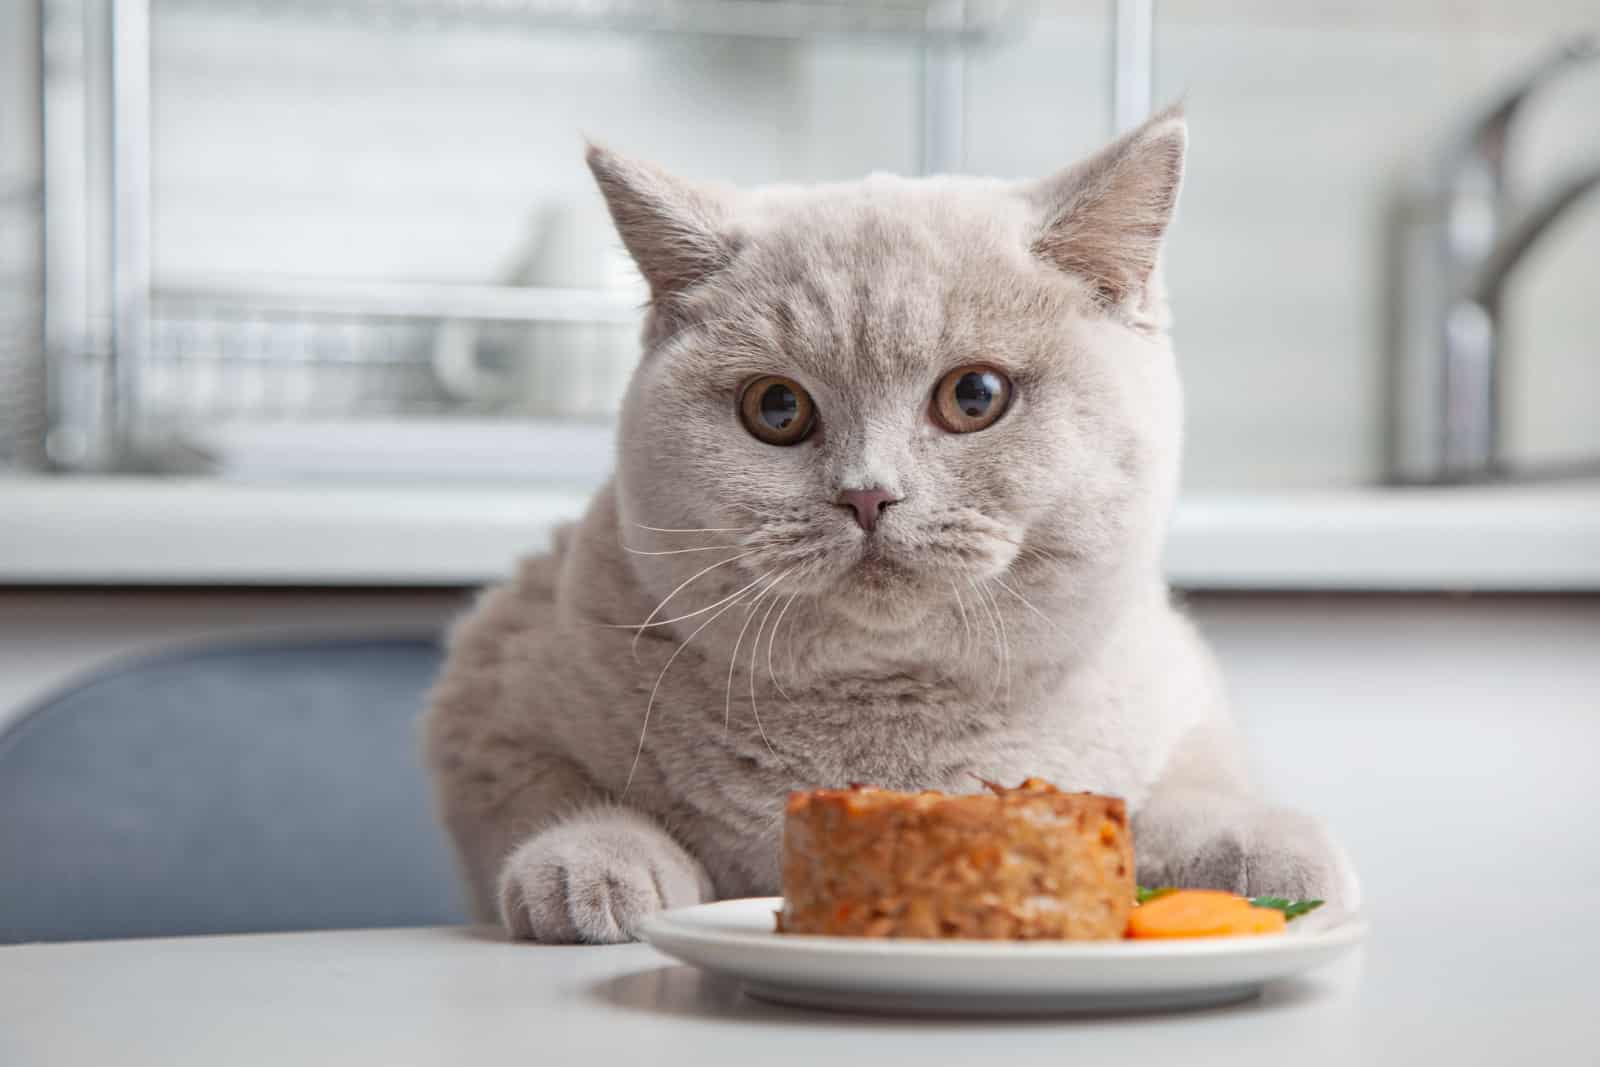 cat and plate of pet food in domestic kitchen